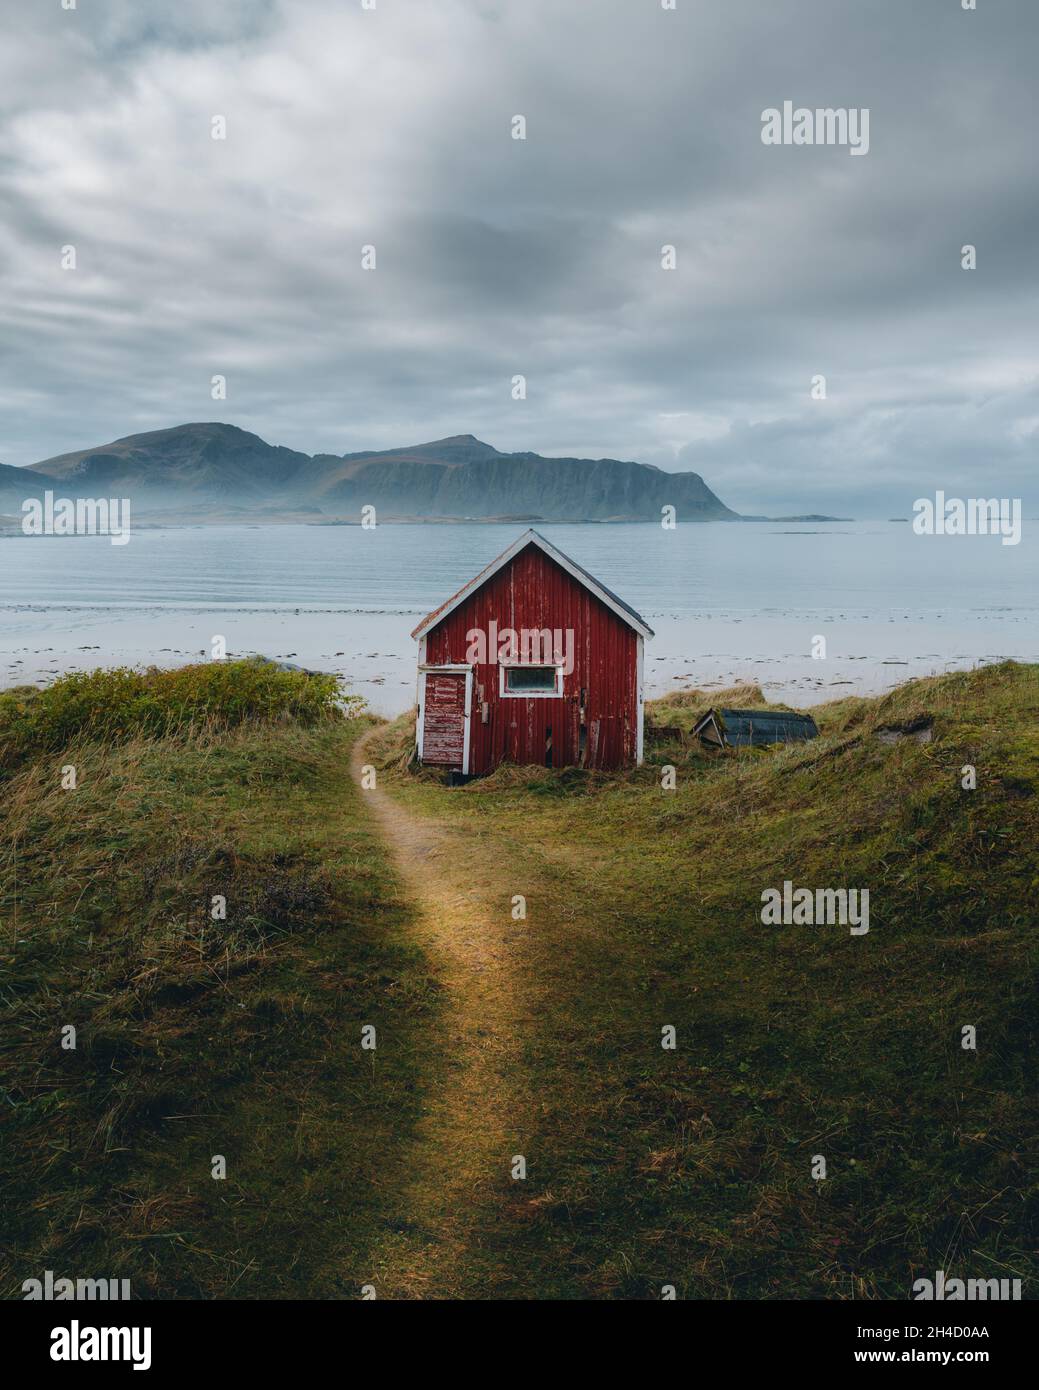 A typical red and colorful cottage of the Norwegian culture and architecture in Norway  Stock Photo